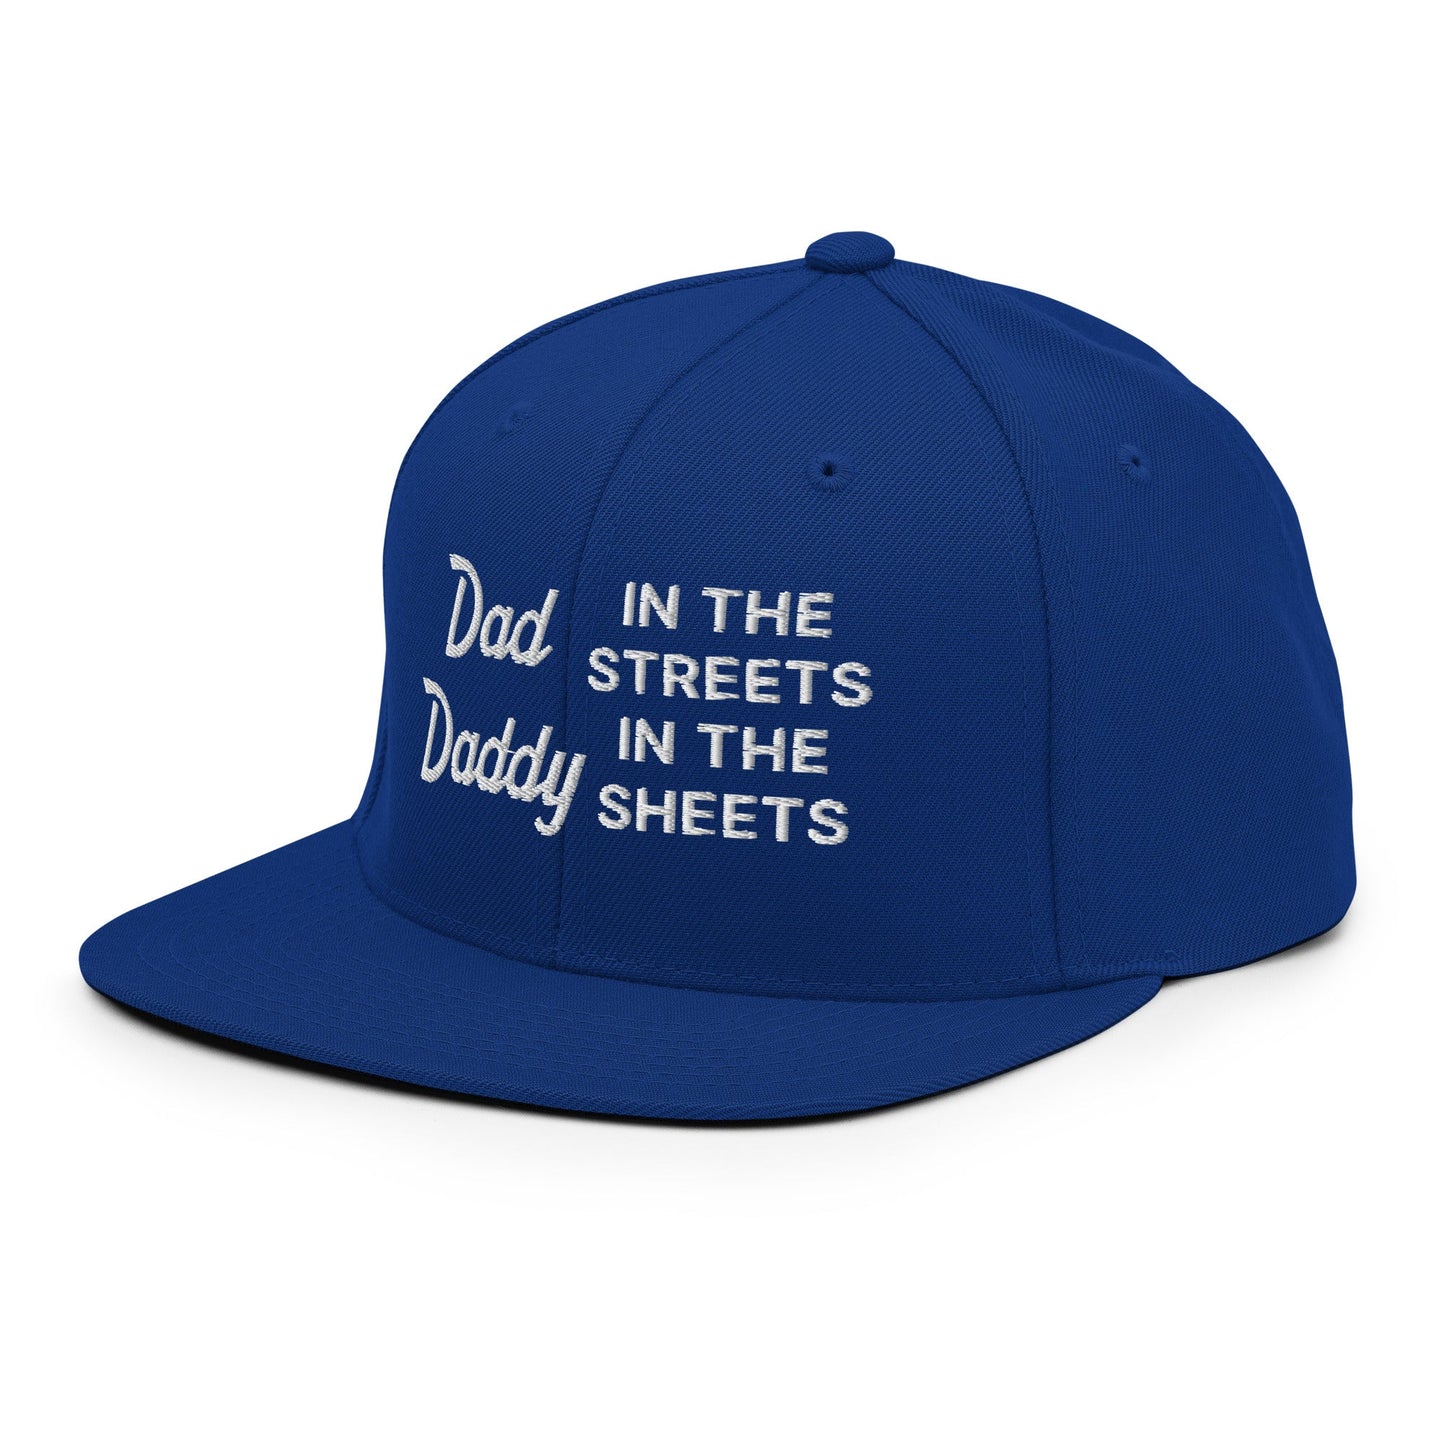 Dad In The Streets Daddy In The Sheets Snapback Hat Royal Blue